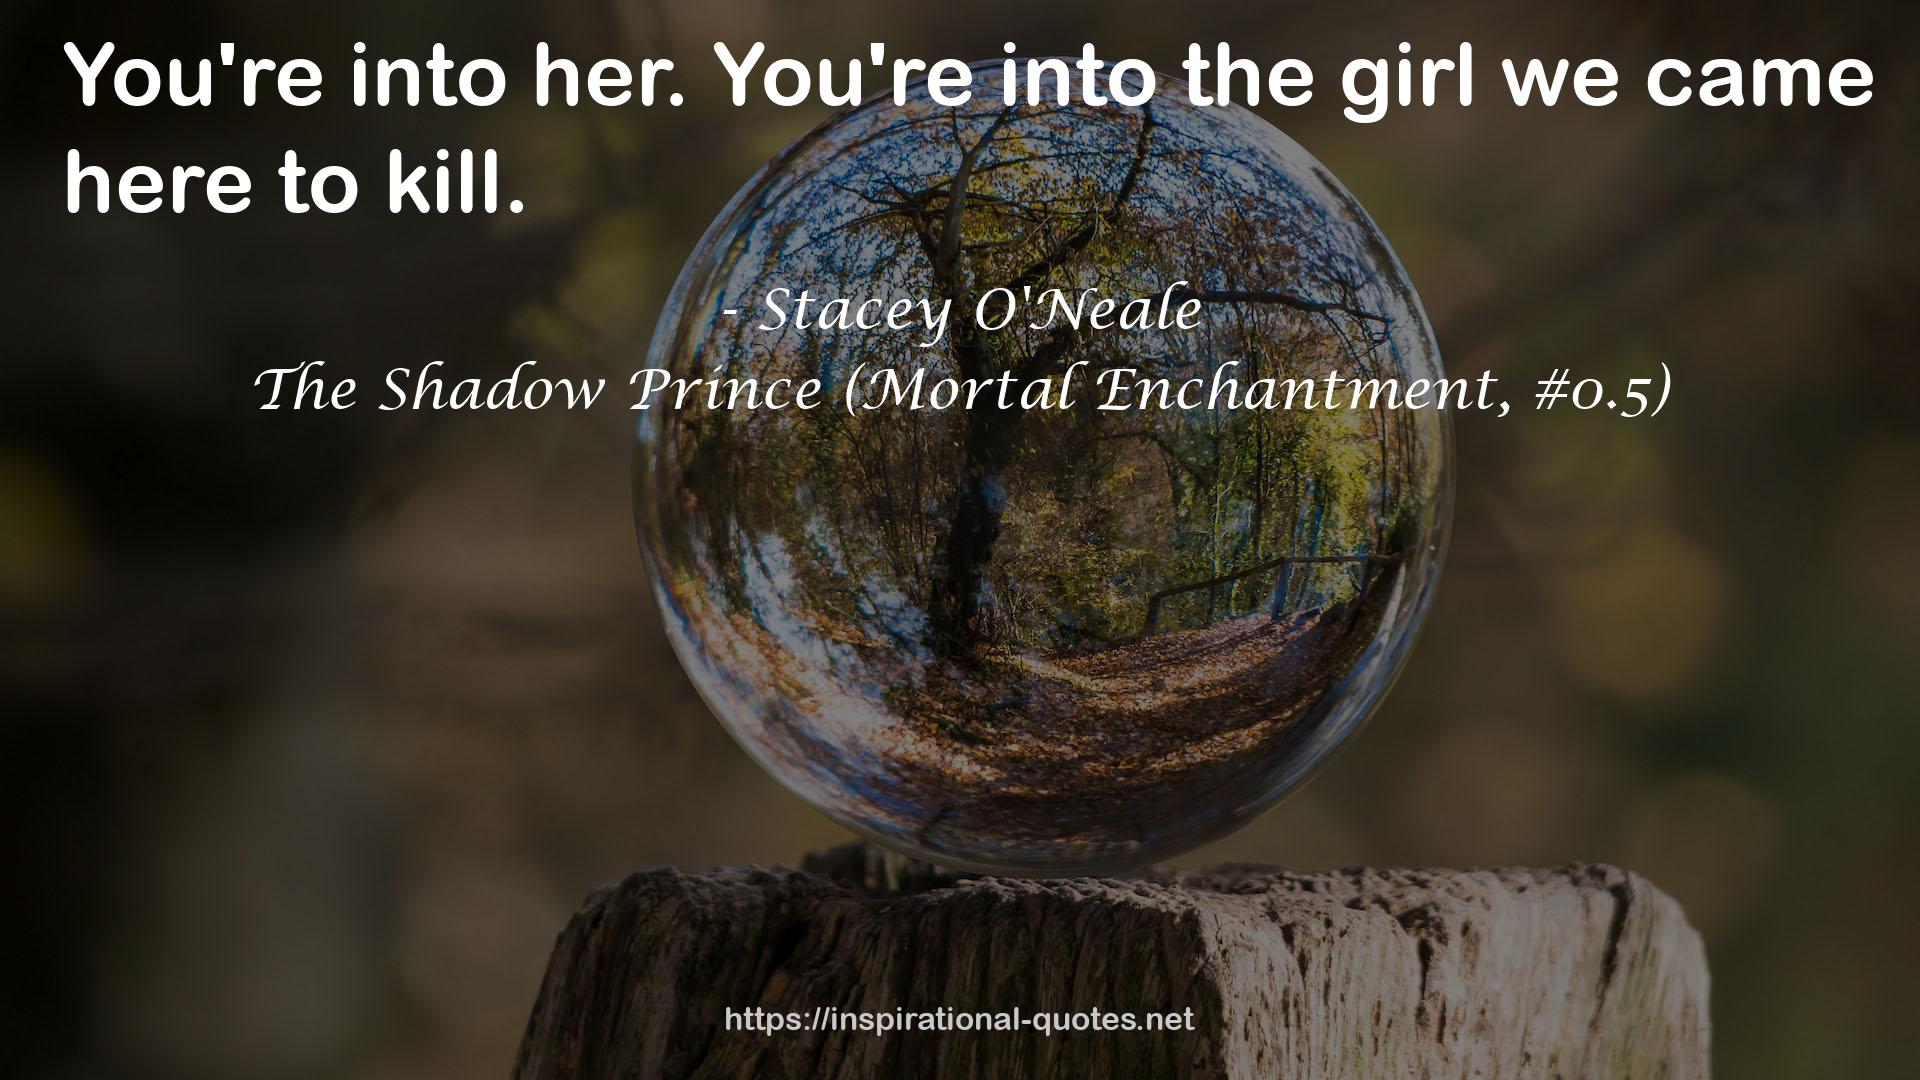 The Shadow Prince (Mortal Enchantment, #0.5) QUOTES